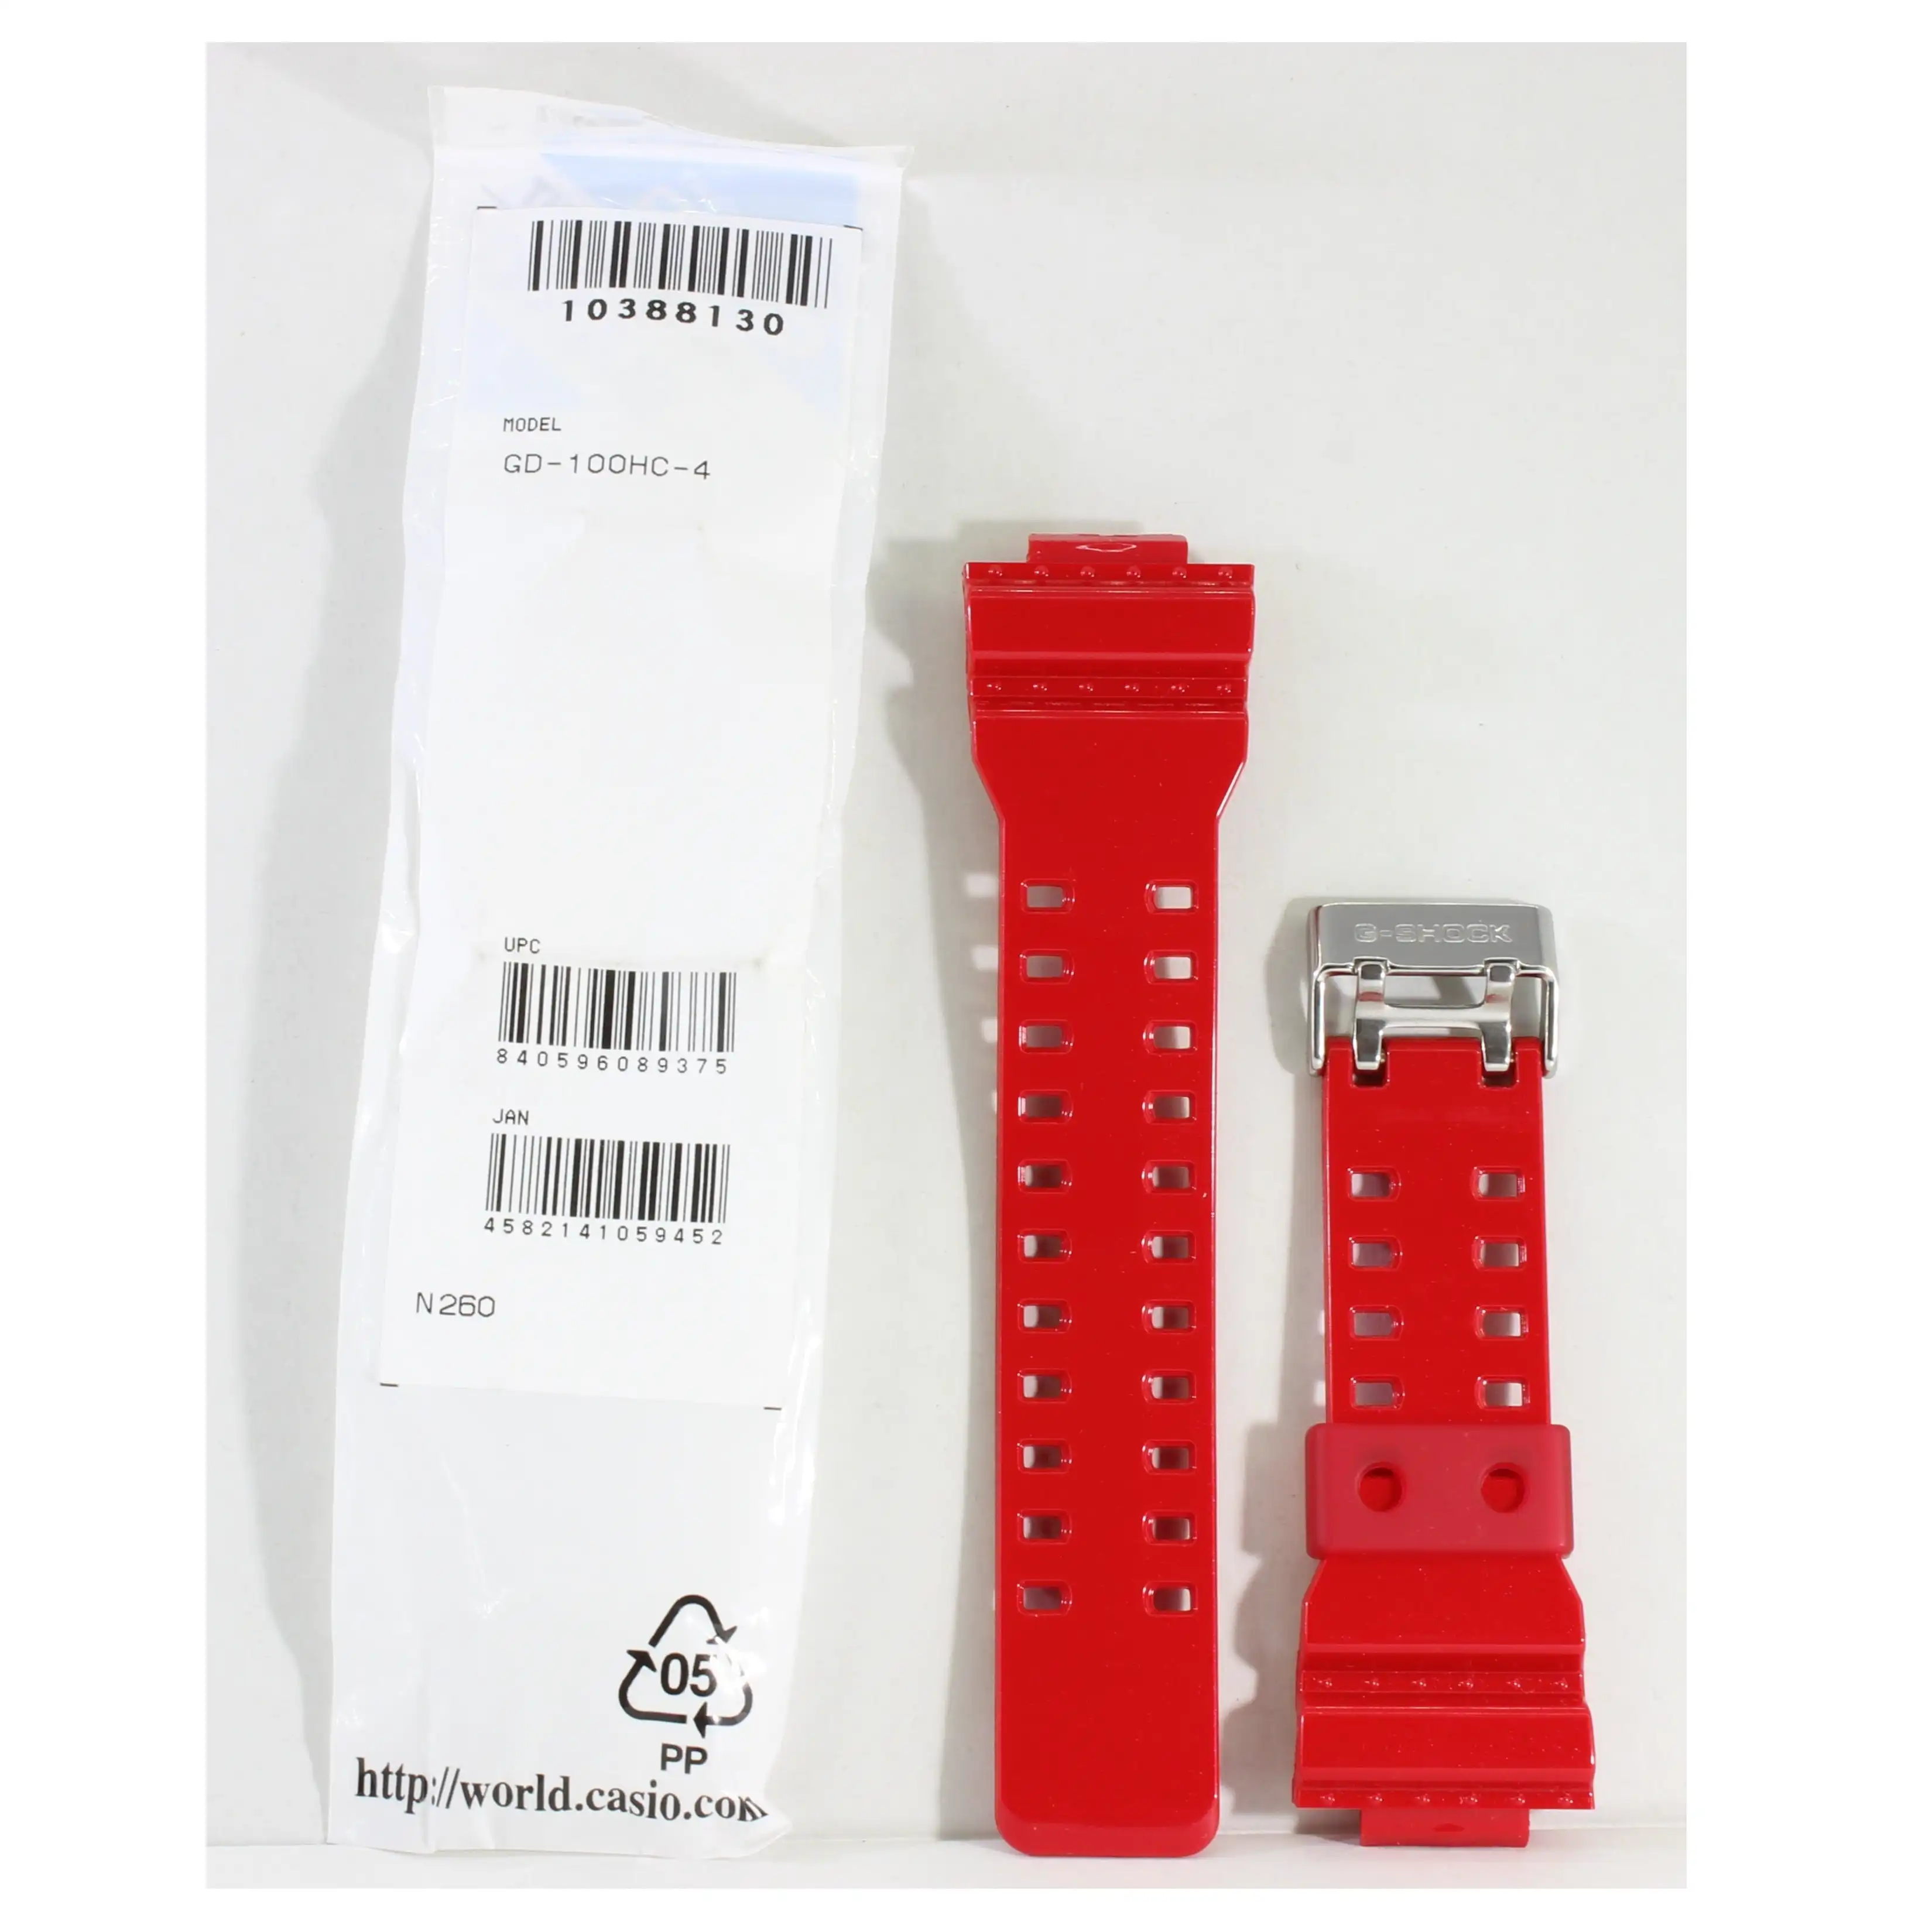 Casio G-Shock Shiny Red Genuine Replacement Strap 10388130 to suit GD-100HC-4